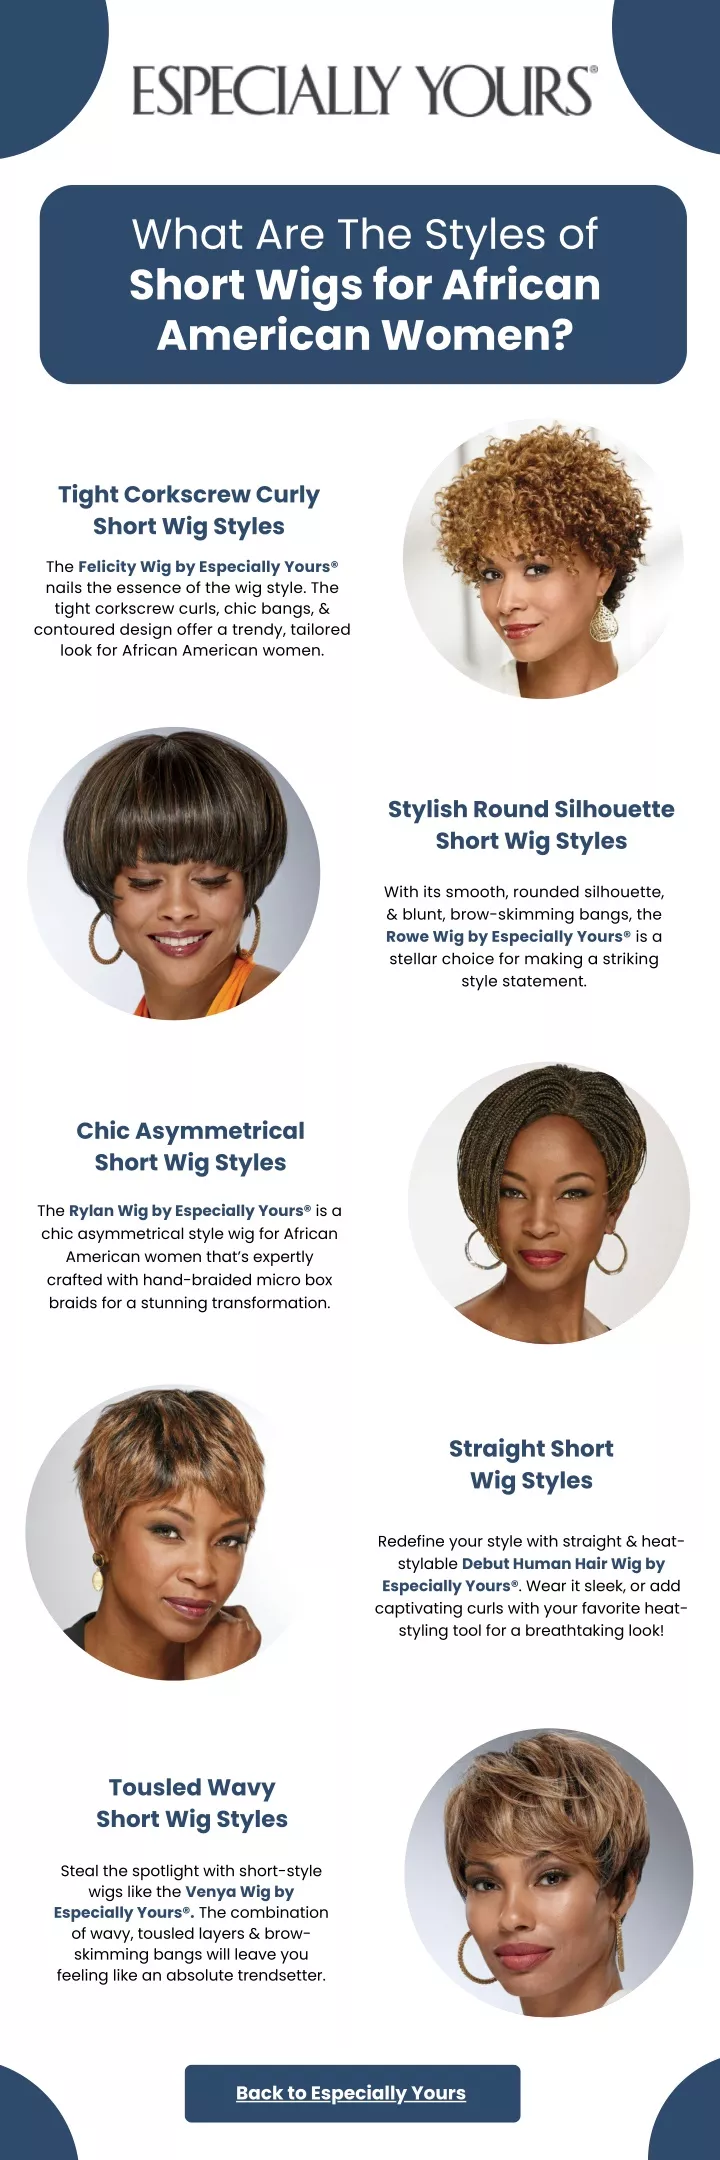 what are the styles of short wigs for african